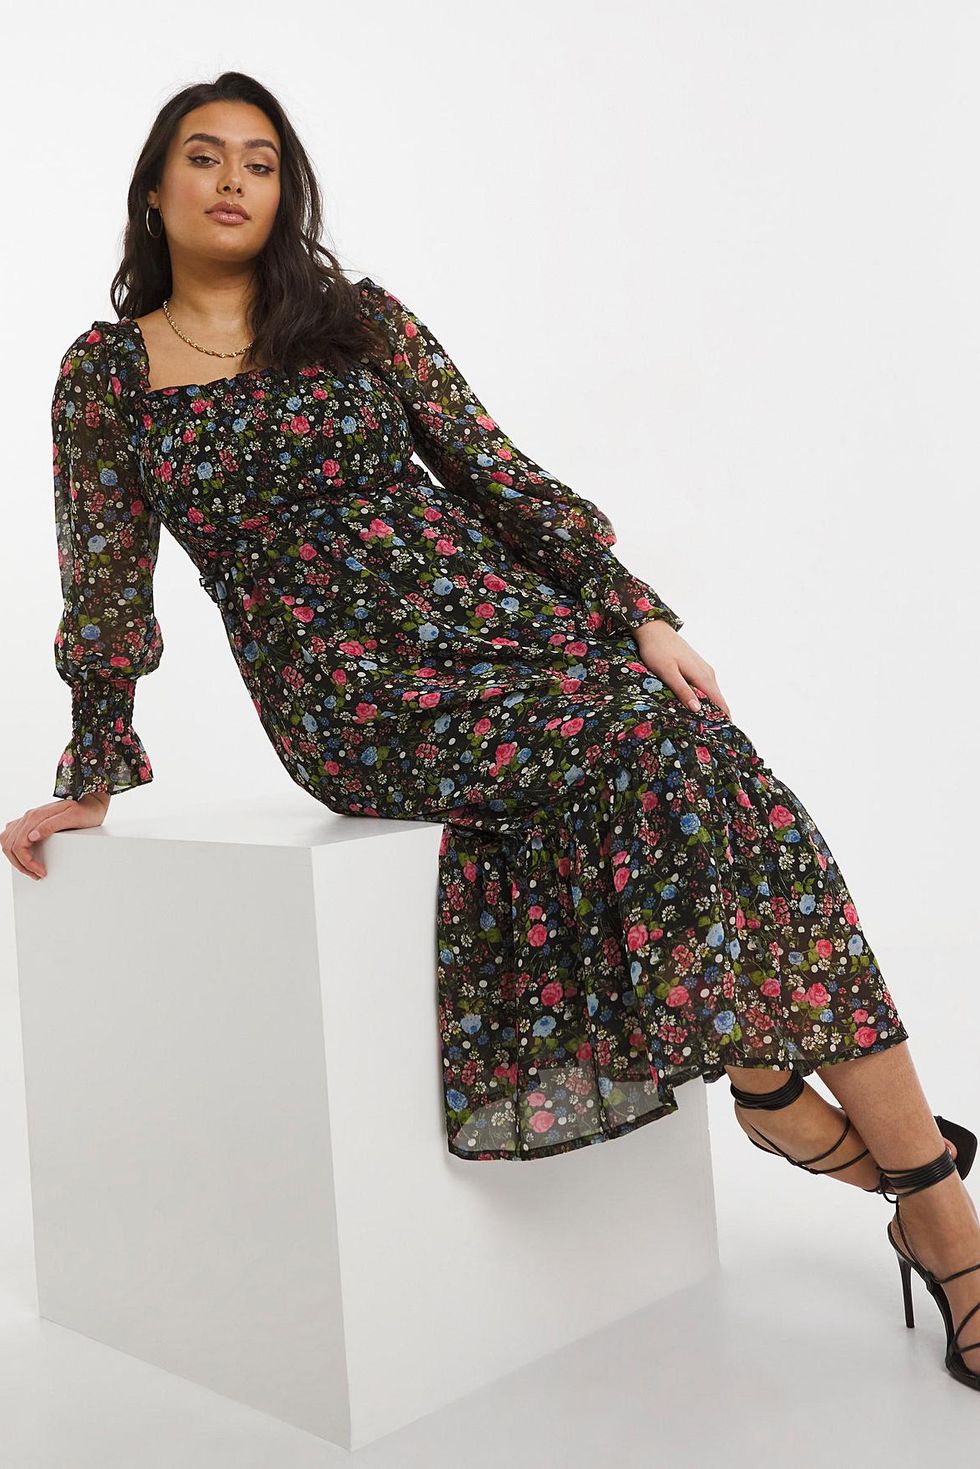 Black Floral Simply Beautiful Square Neck Tiered Midi Dress: Floral dresses